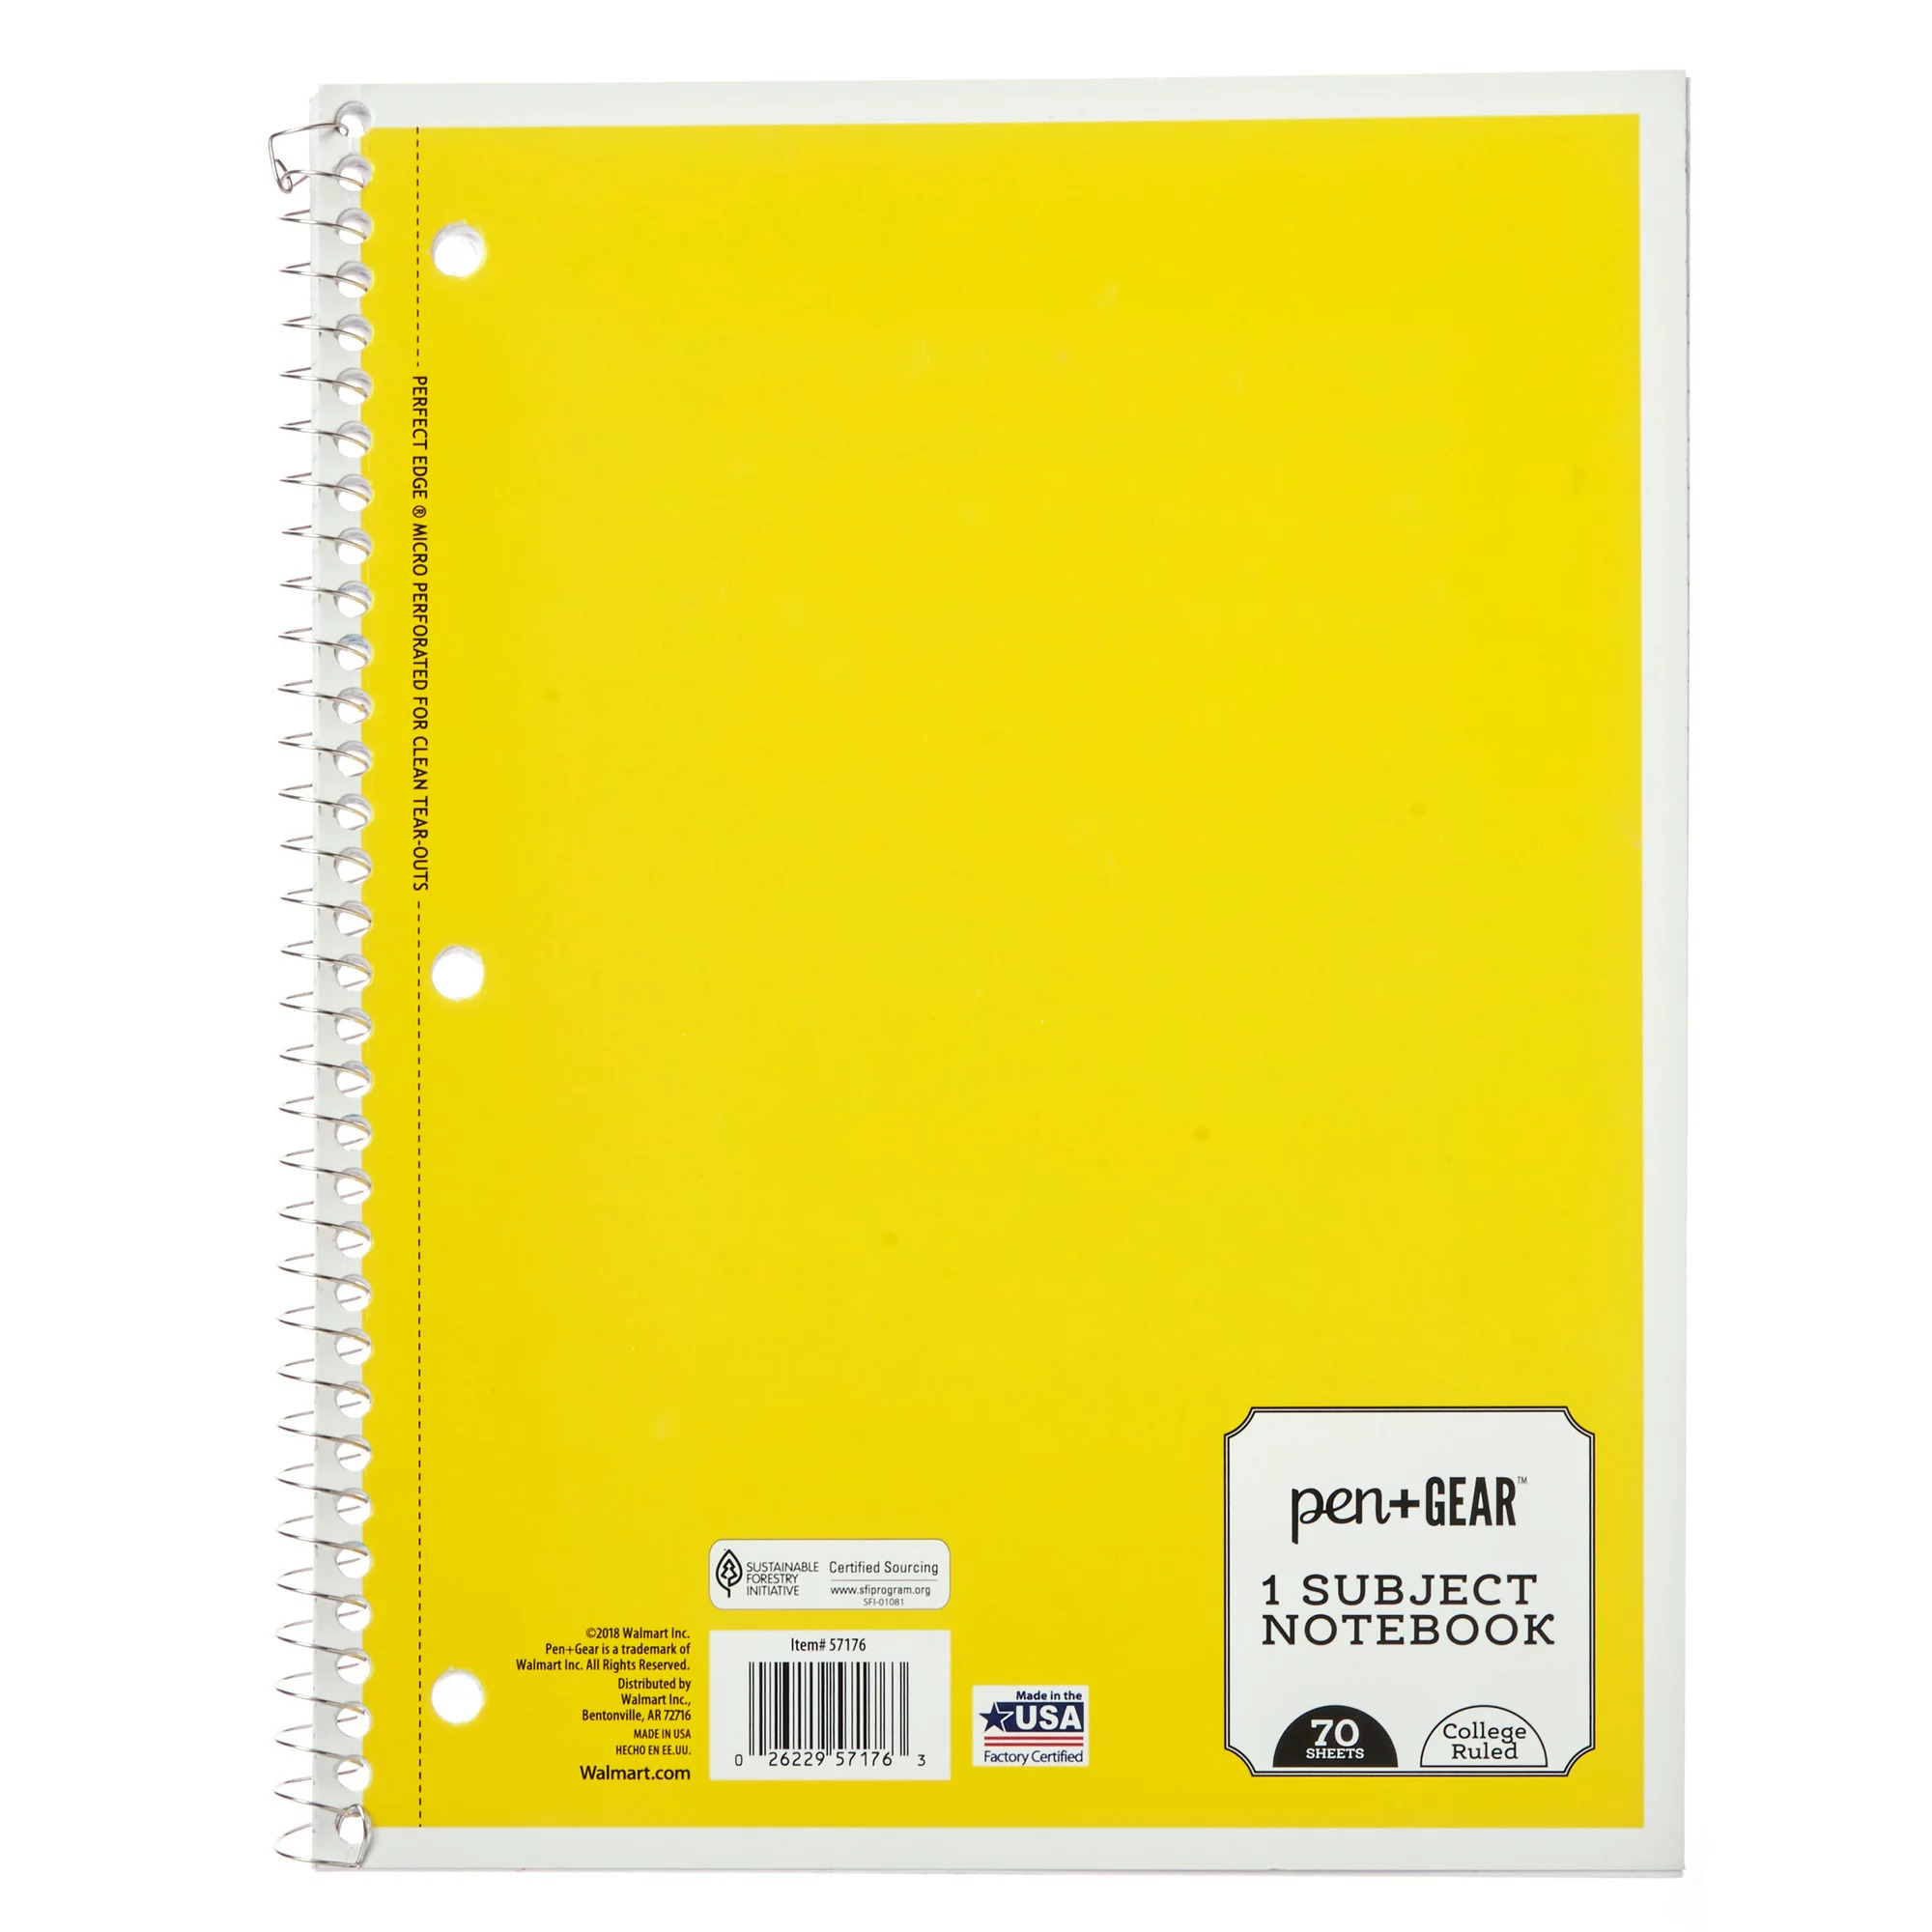 Pen + Gear 1-Subject Spiral Notebook, College Ruled, 70 Pages, Yellow